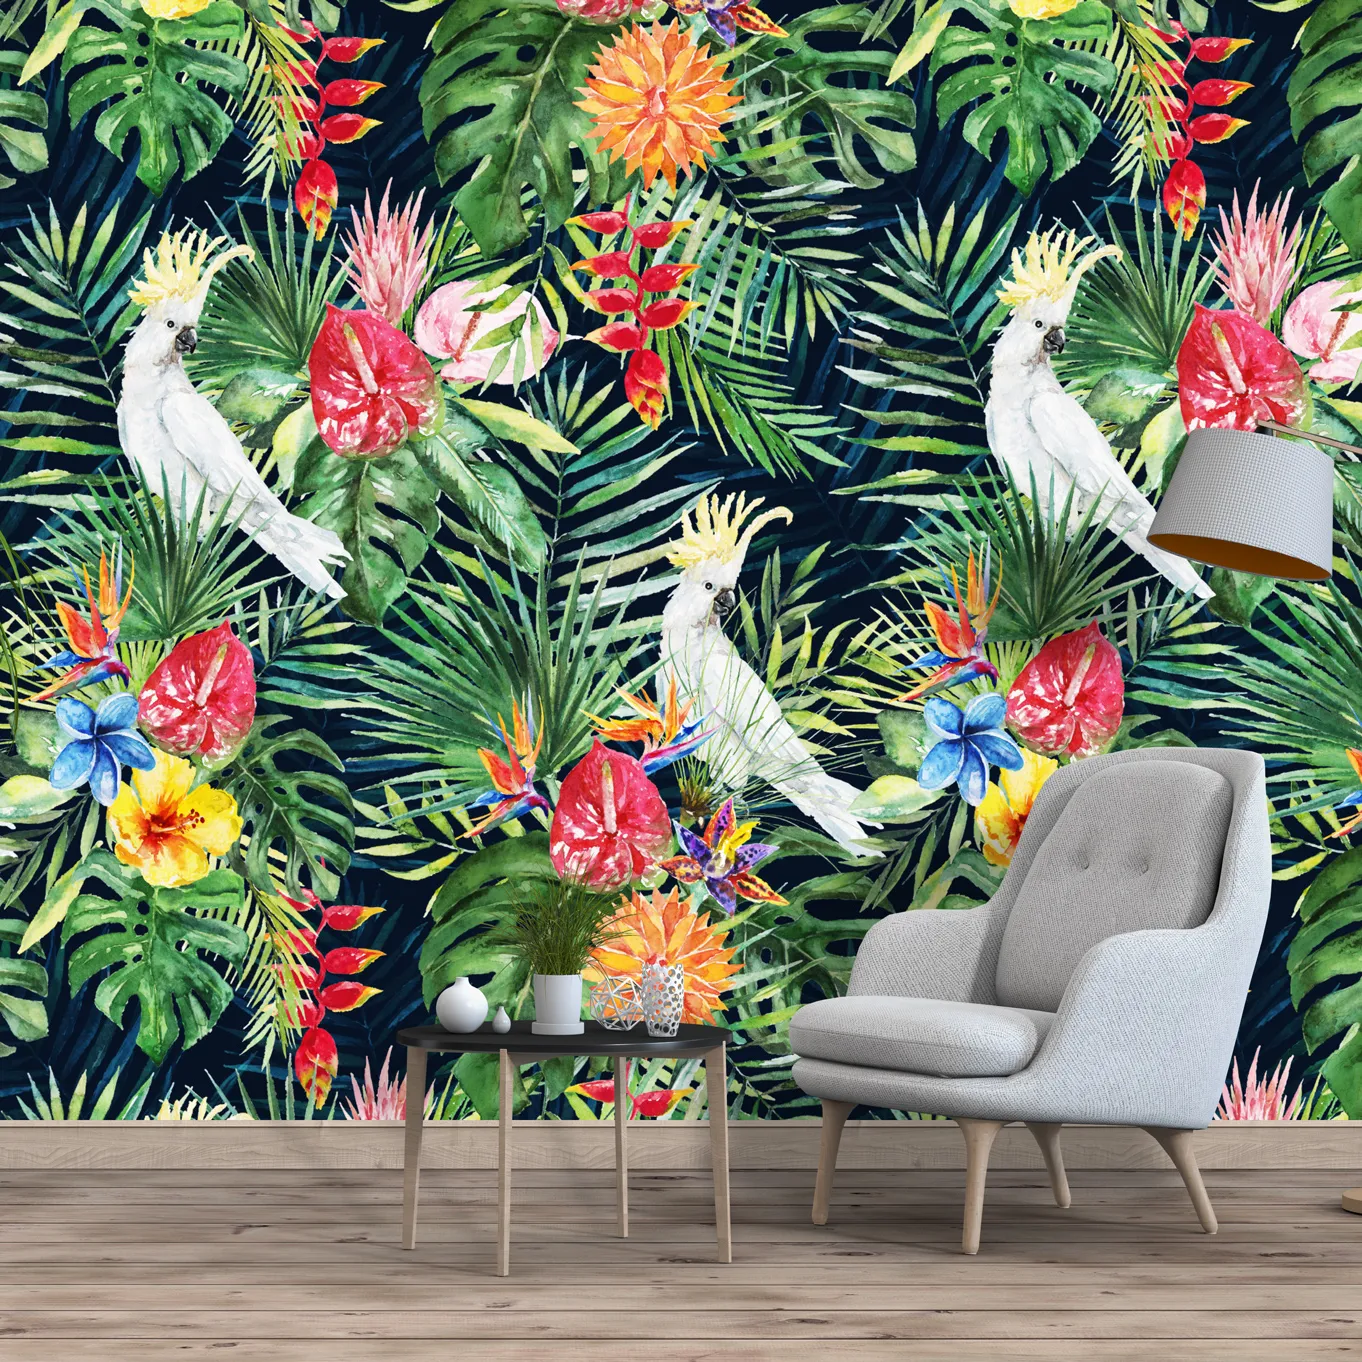 Repeat Vector Pattern With Tropical Bird On Purple Background Textured  Flamingo Wallpaper Design Decorative Summer Fun Fashion Textile Stock  Illustration  Download Image Now  iStock